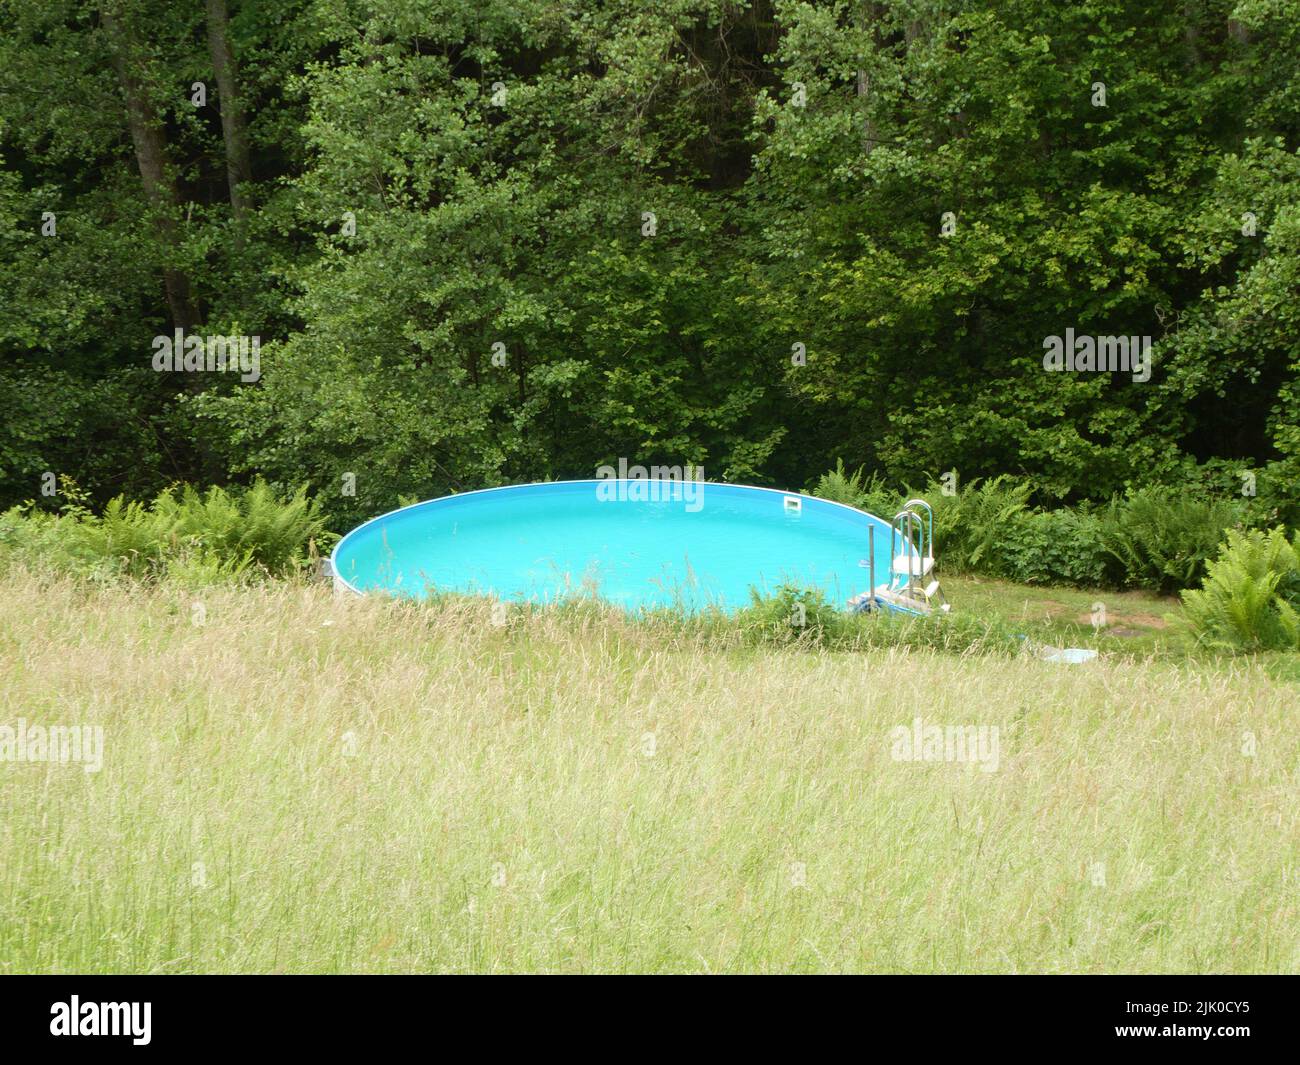 Surprising pool in the landscape Stock Photo